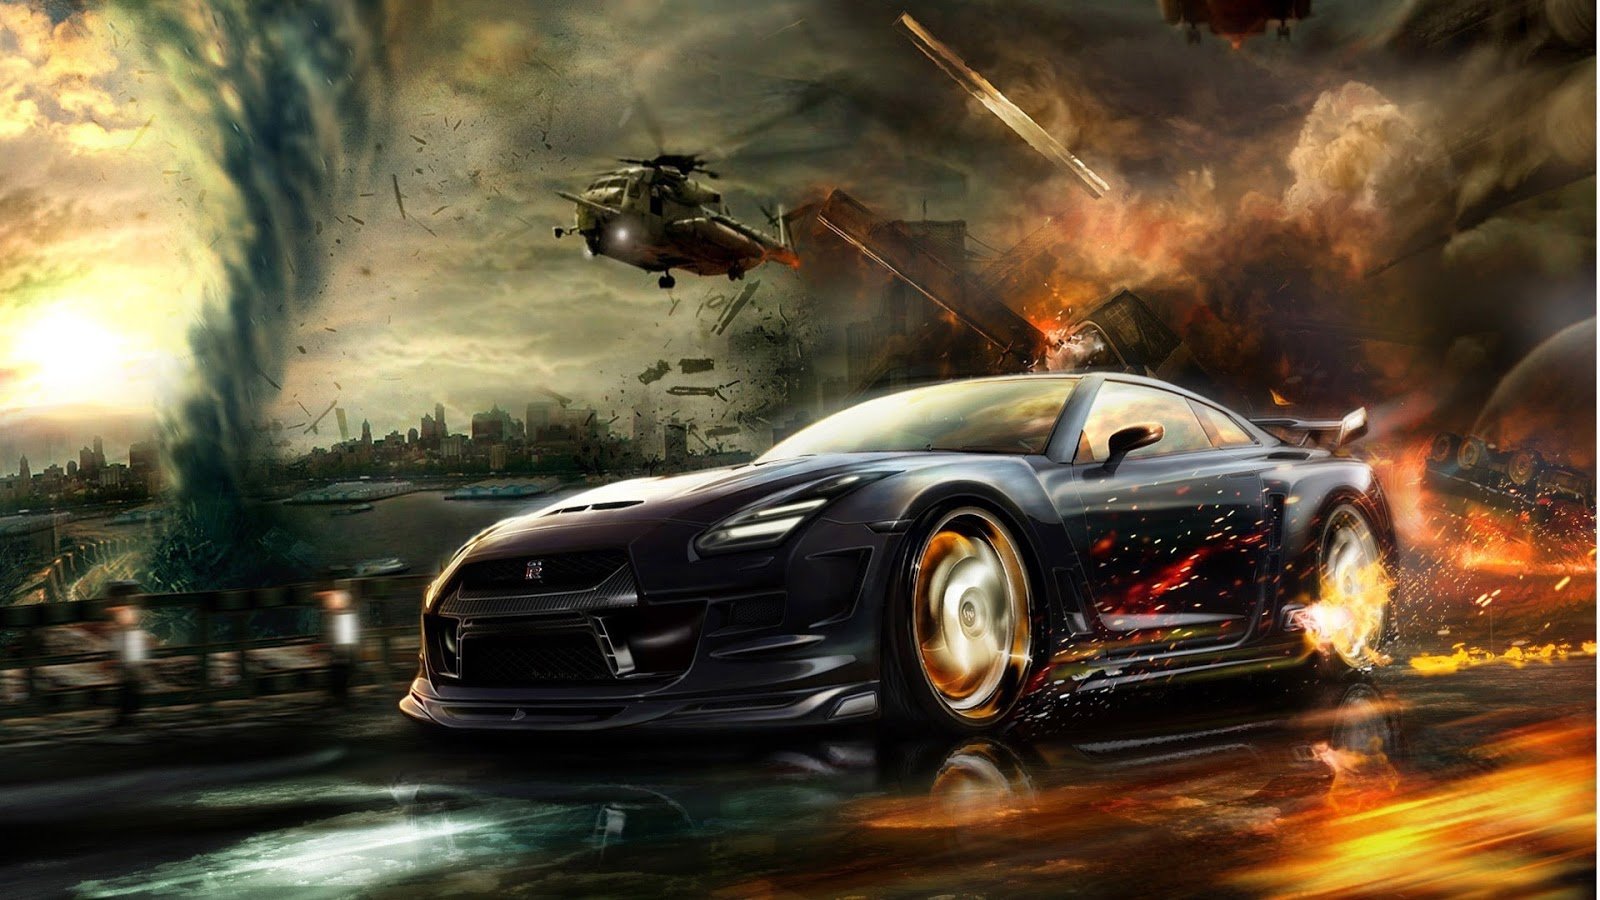 Ultra HD Wallpapers3d images latest ultra pictures cars